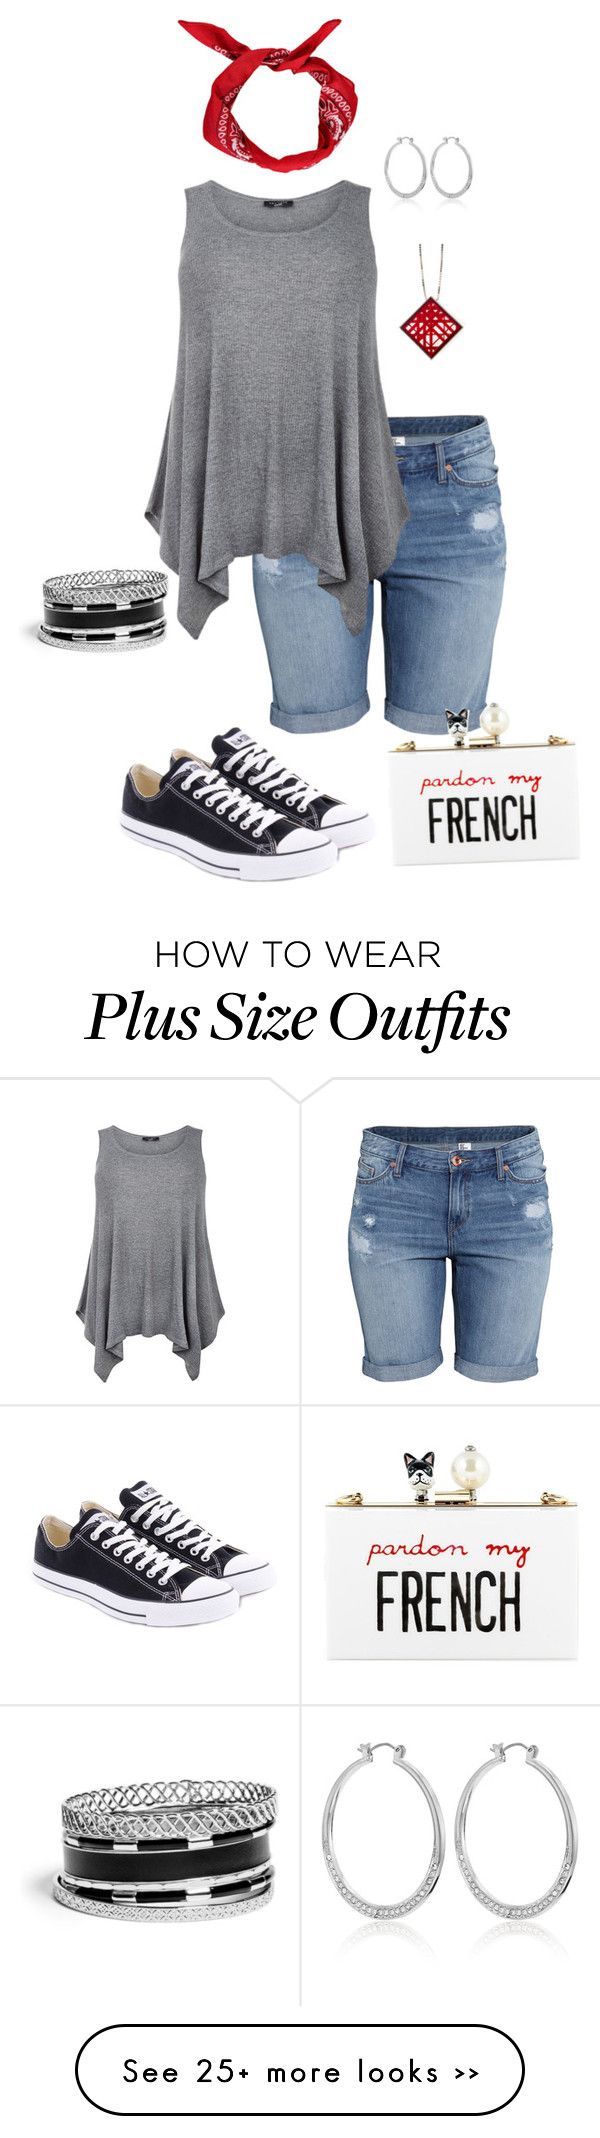 “Viola!- plus size” by gchamama on Polyvore